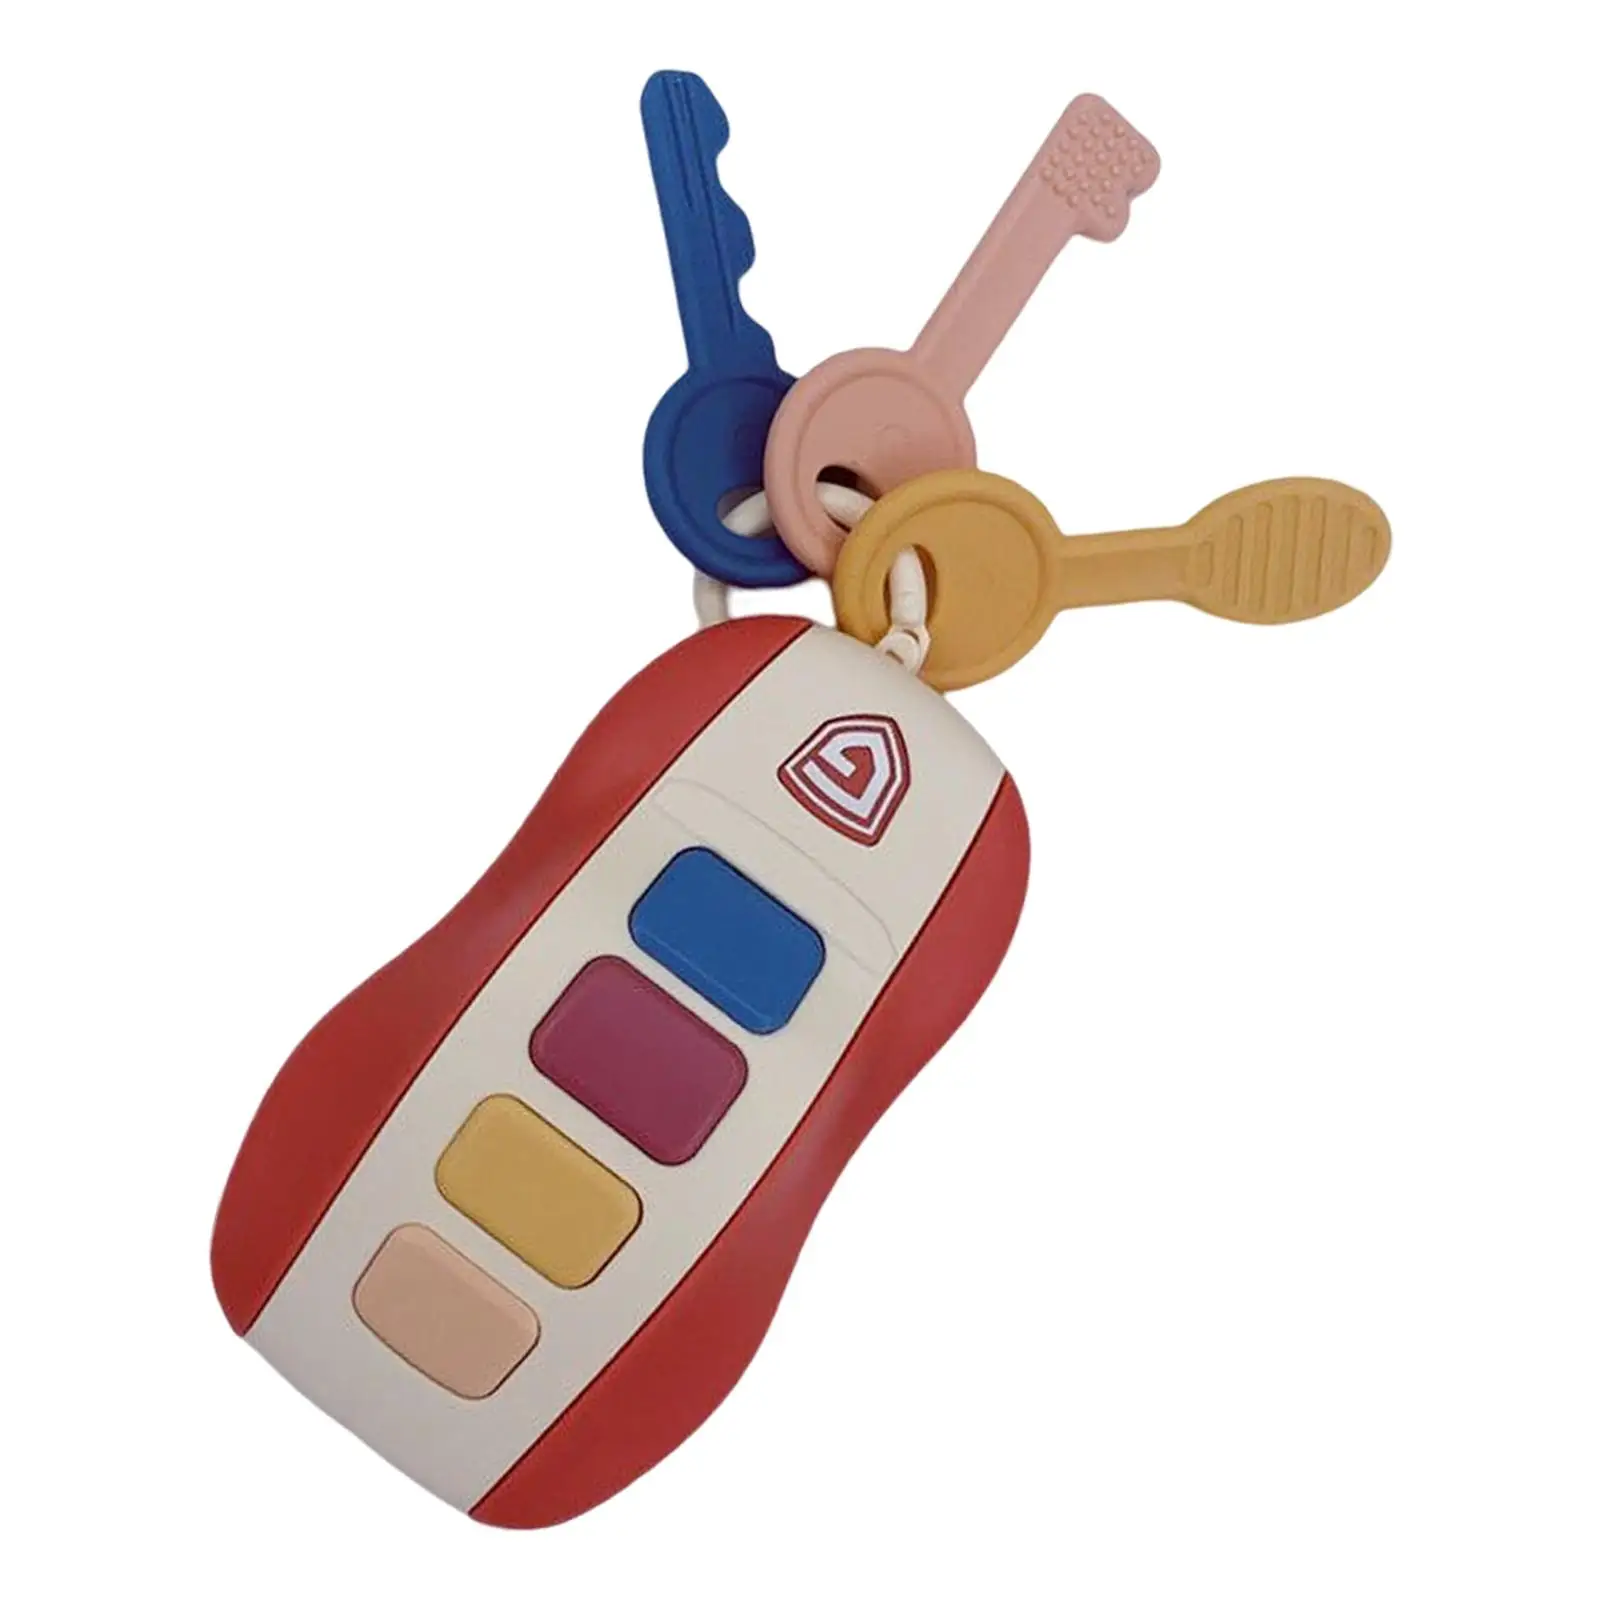 2Pcs Toy Car Keys on A Keychain Musical Smart Remote Key for Toddler Gifts